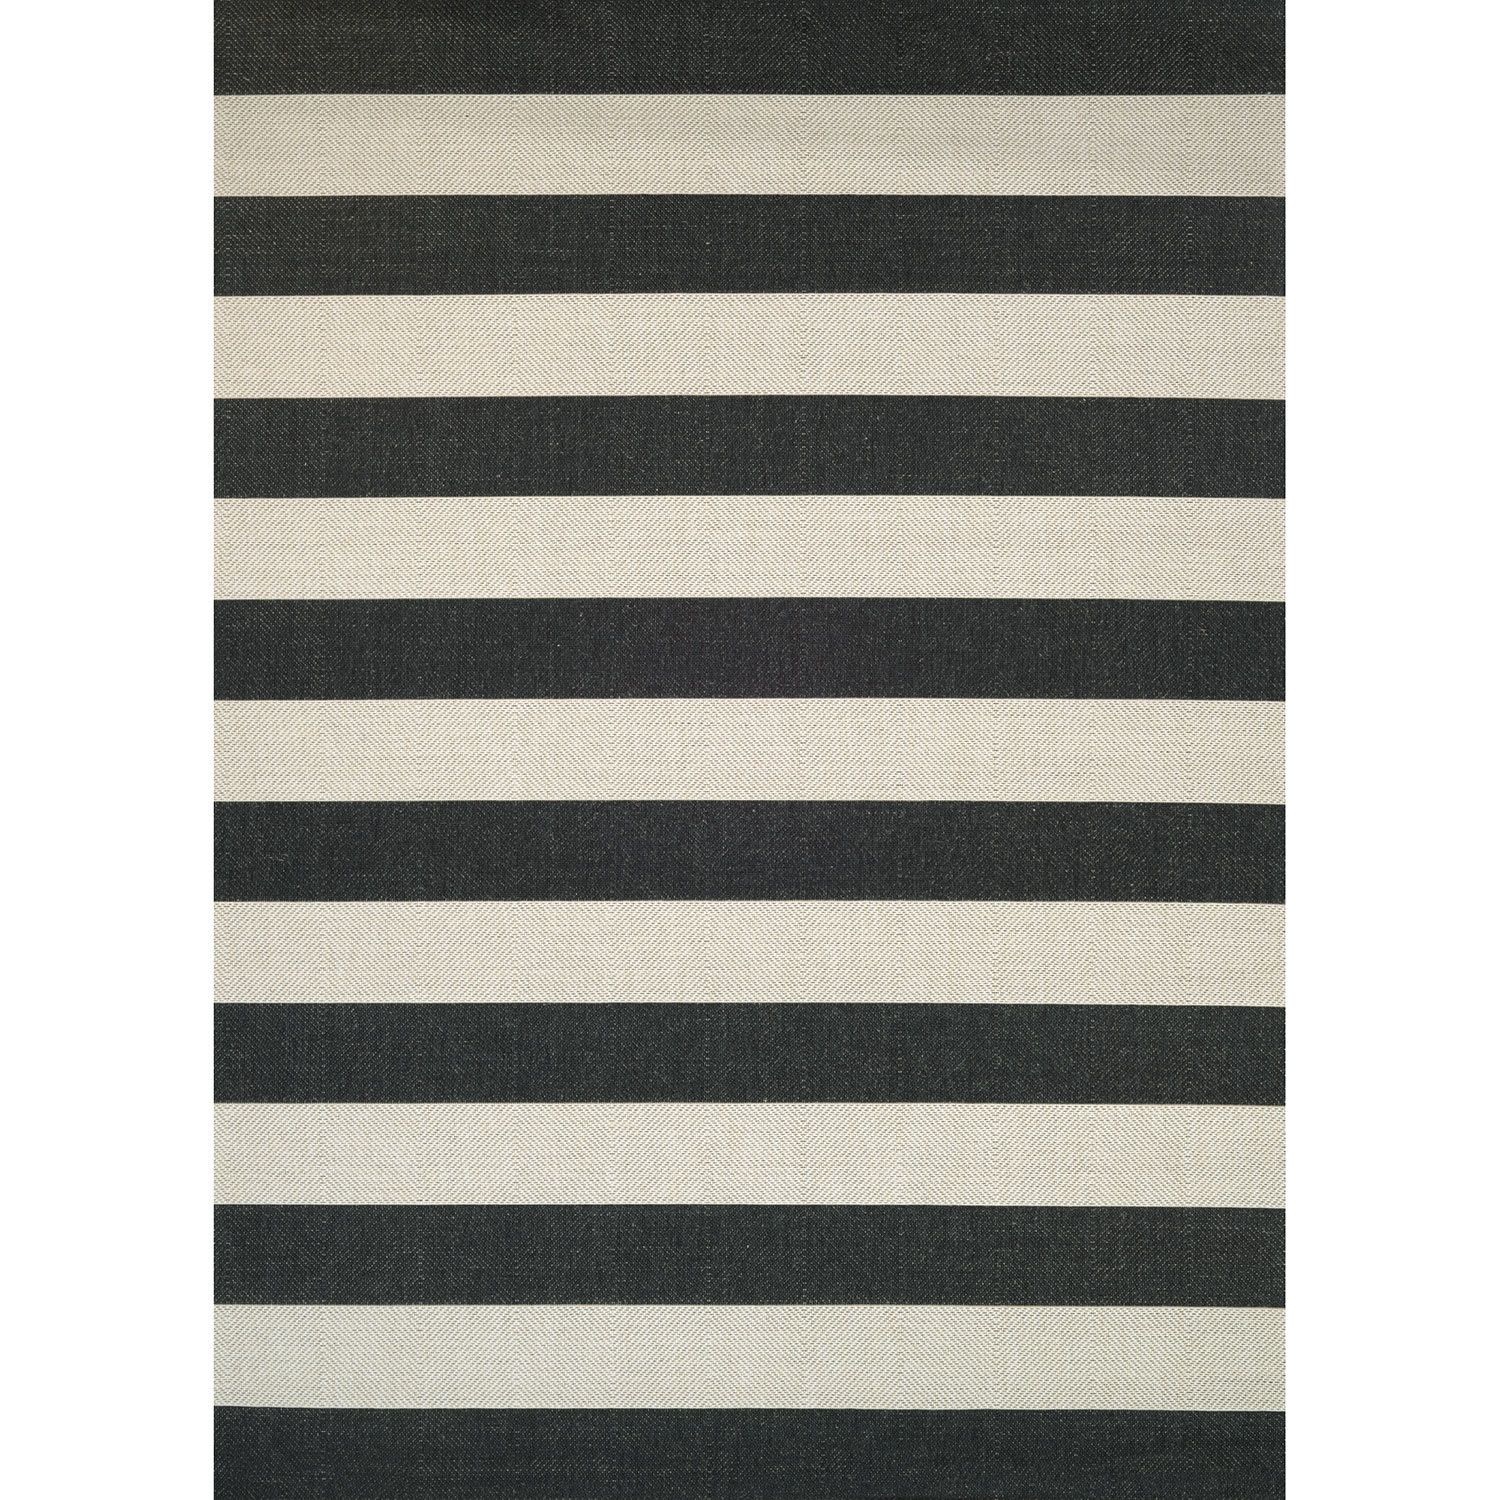 Westport Stripe Indoor/Outdoor Rug - Black, Size Runner | The Company Store | The Company Store